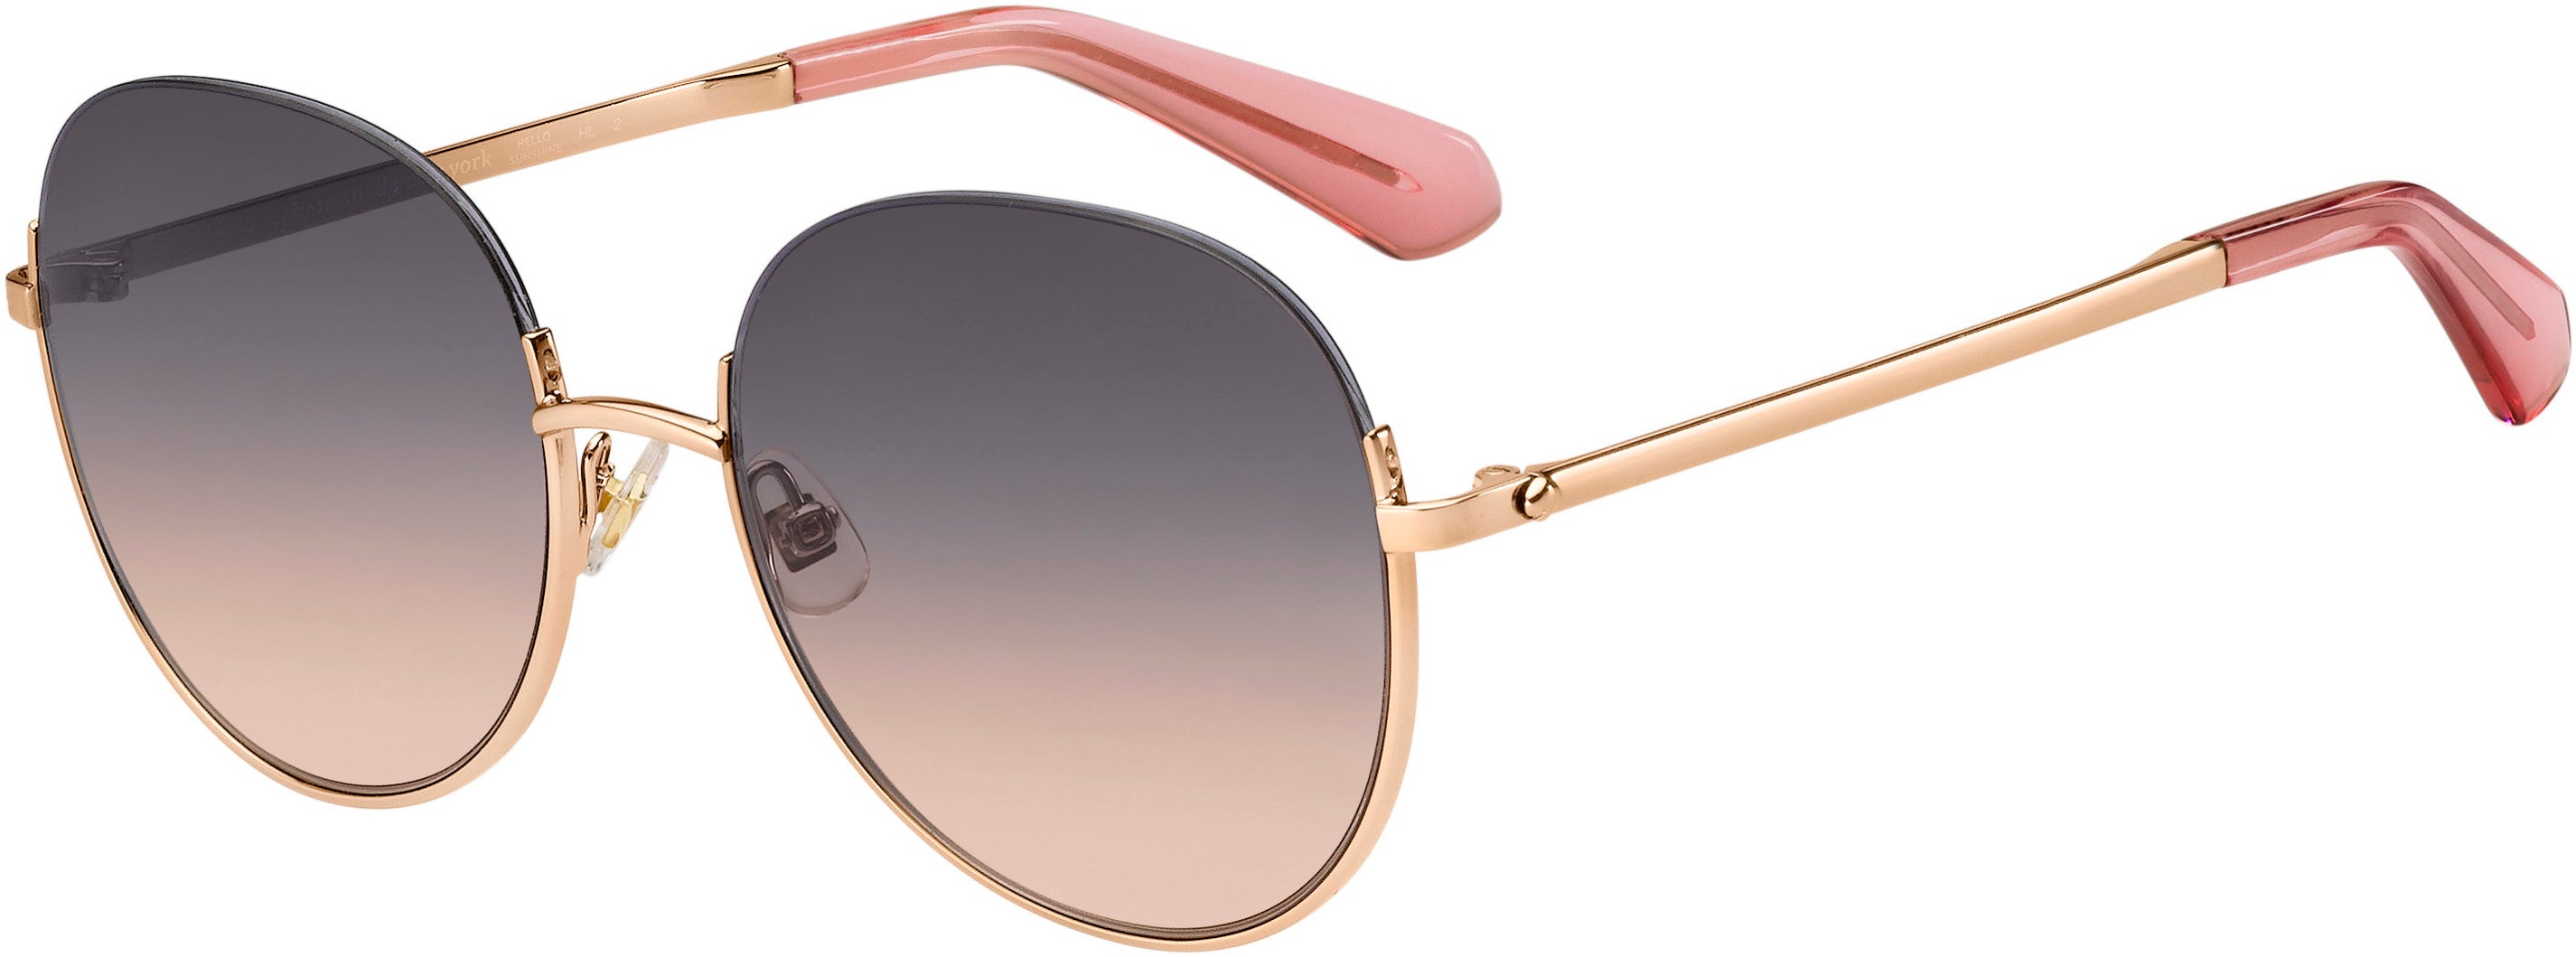 Kate Spade Astelle/G/S Oval Modified Sunglasses 0000-0000  Rose Gold (FF Gray Shded Pink)